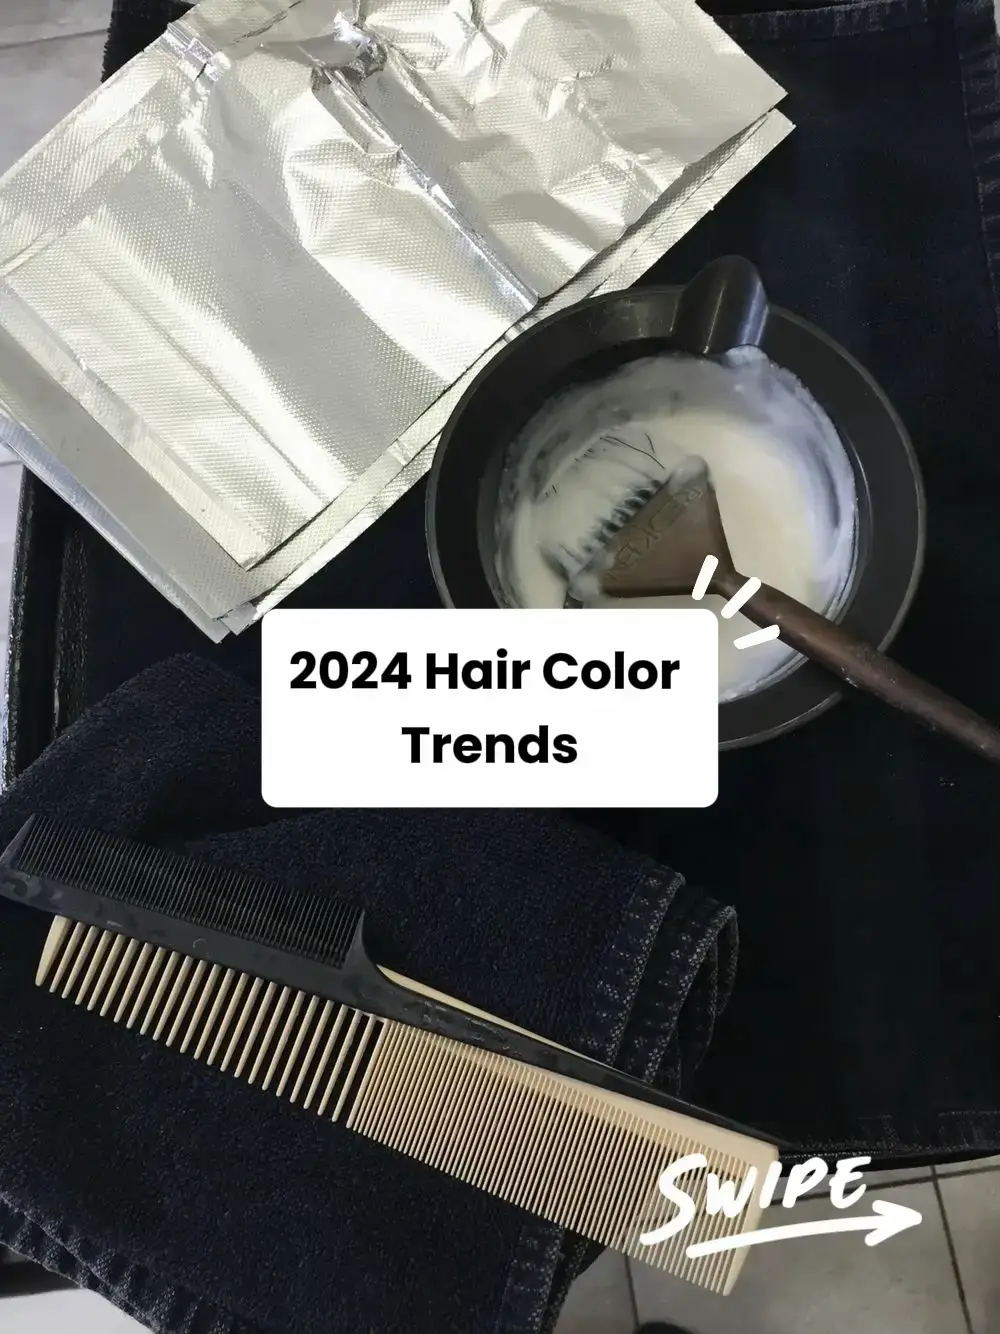 50 Best Hair Colors and Hair Color Trends for 2024 - Hair Adviser